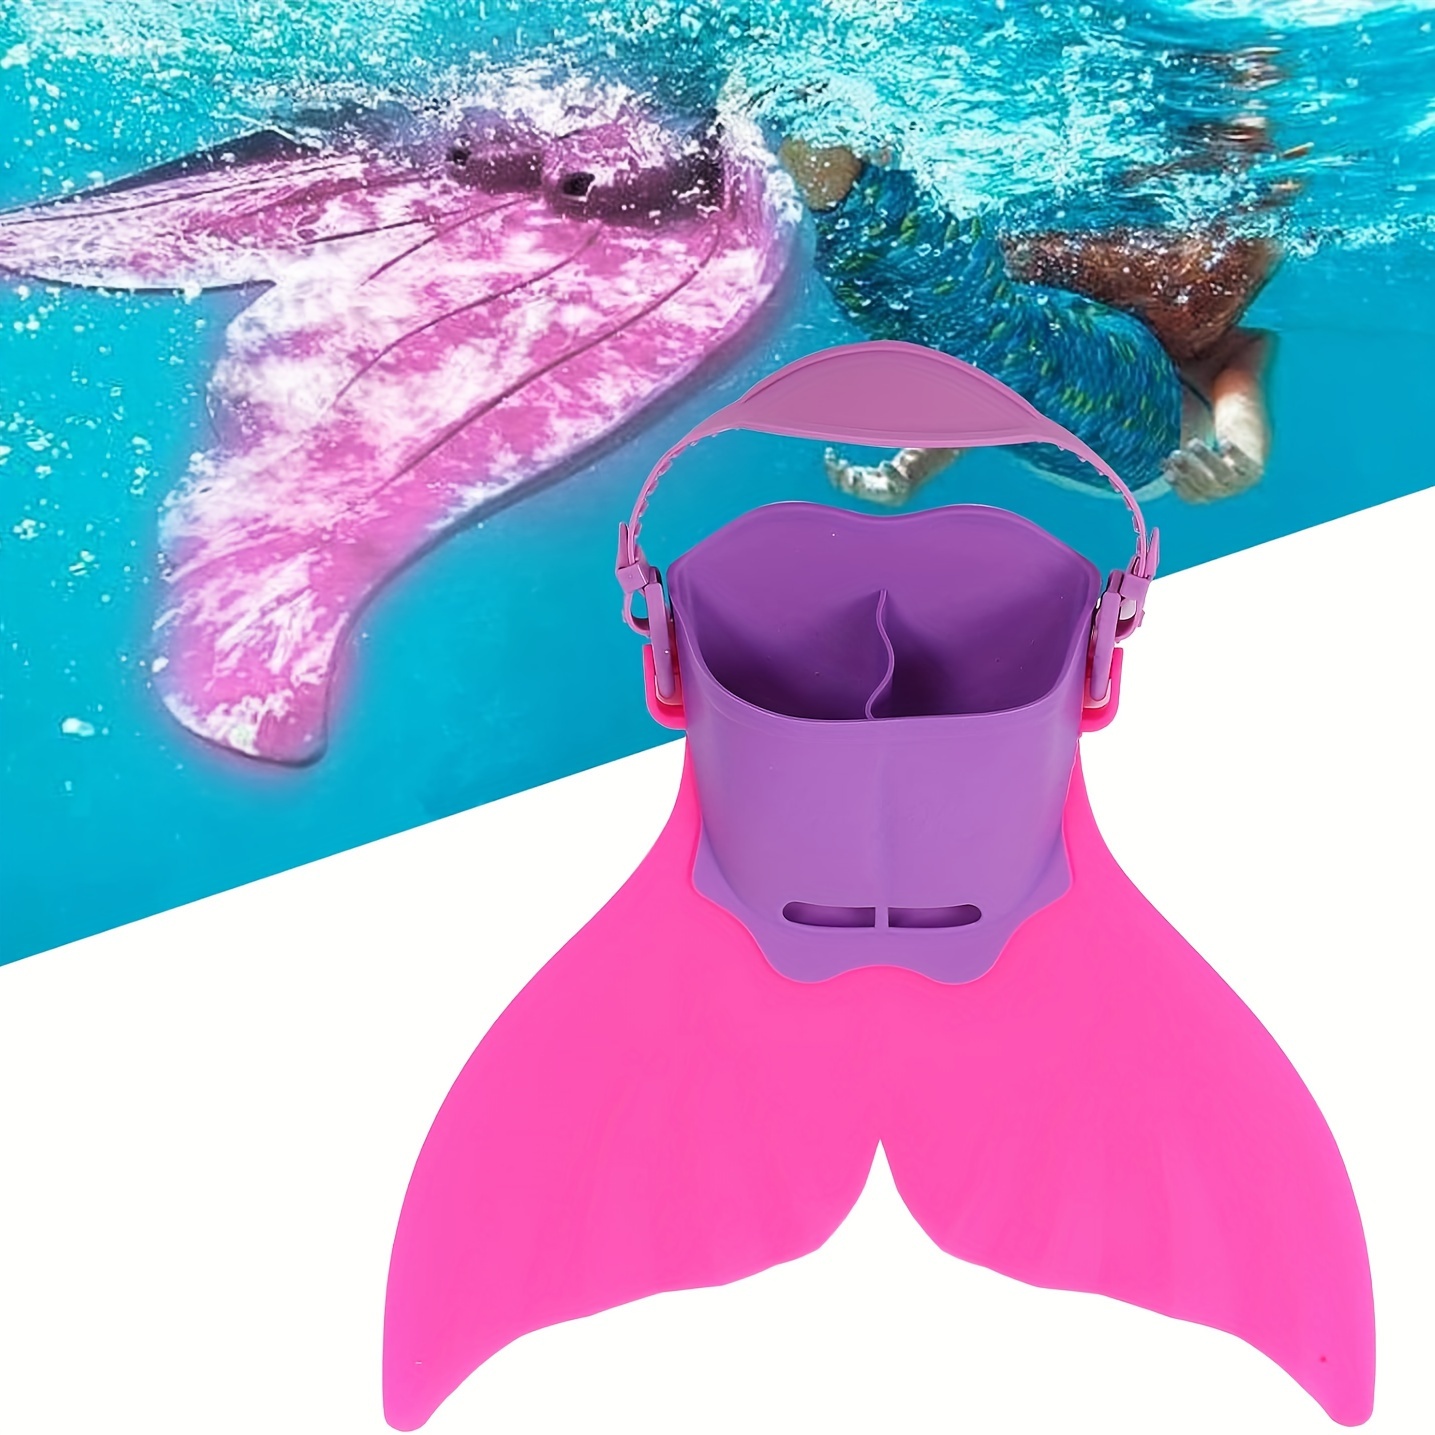 

Teenager Cartoon Mermaid Swimming Fins, Adjustable Flippers, Swimming Training Tail Fins, Pool Beach Swimming Diving Training Summer Use